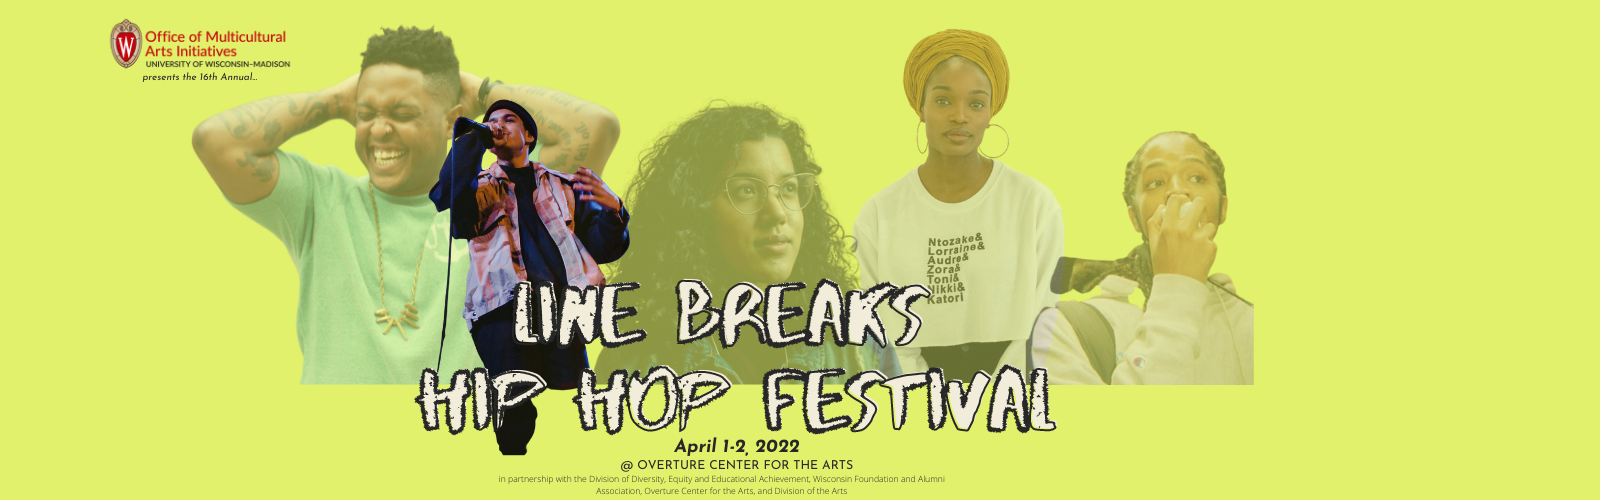 Yellow background with cutout images of people performing spoken word poetry with text mimicing spray paint reading "Line Breaks Hip Hop Festival."